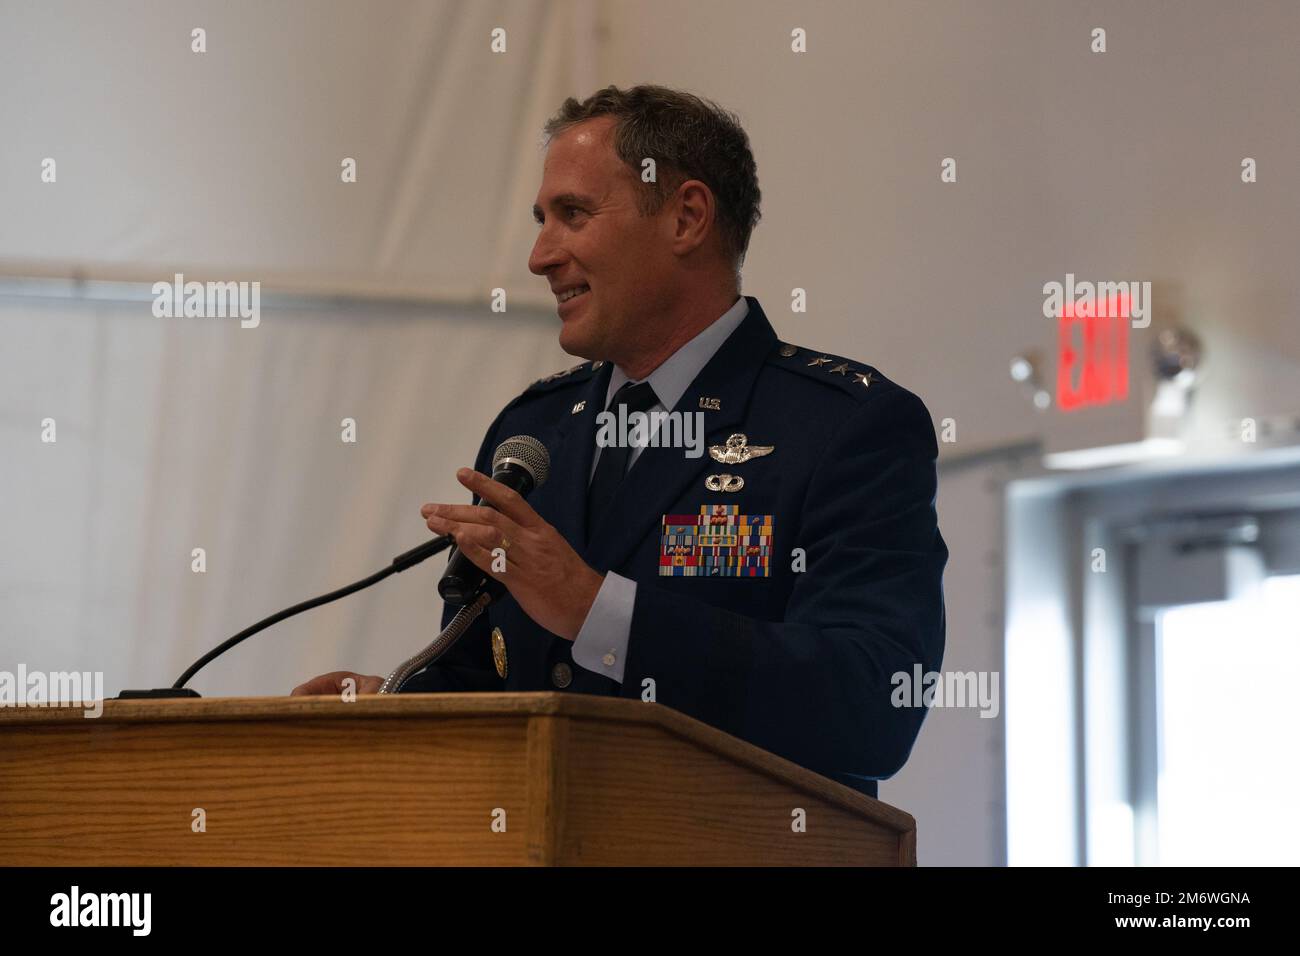 U.S. Air Force Lt. Gen. David A. Krumm, is the Commander, Alaskan Command, United States Northern Command; Commander, Eleventh Air Force, Pacific Air Forces; and Commander, North American Aerospace Defense Command Region, North American Aerospace Defense Command, gives closing remarks at ALCOM’s 75th Anniversary at the Alaska Aviation Museum in Anchorage, Alaska, May 6, 2022. Alaskan Command, in coordination with trusted partners, conducts homeland defense, civil support, mission assurance, and security cooperation within the ALCOM joint area of operations to defend and secure the United State Stock Photo